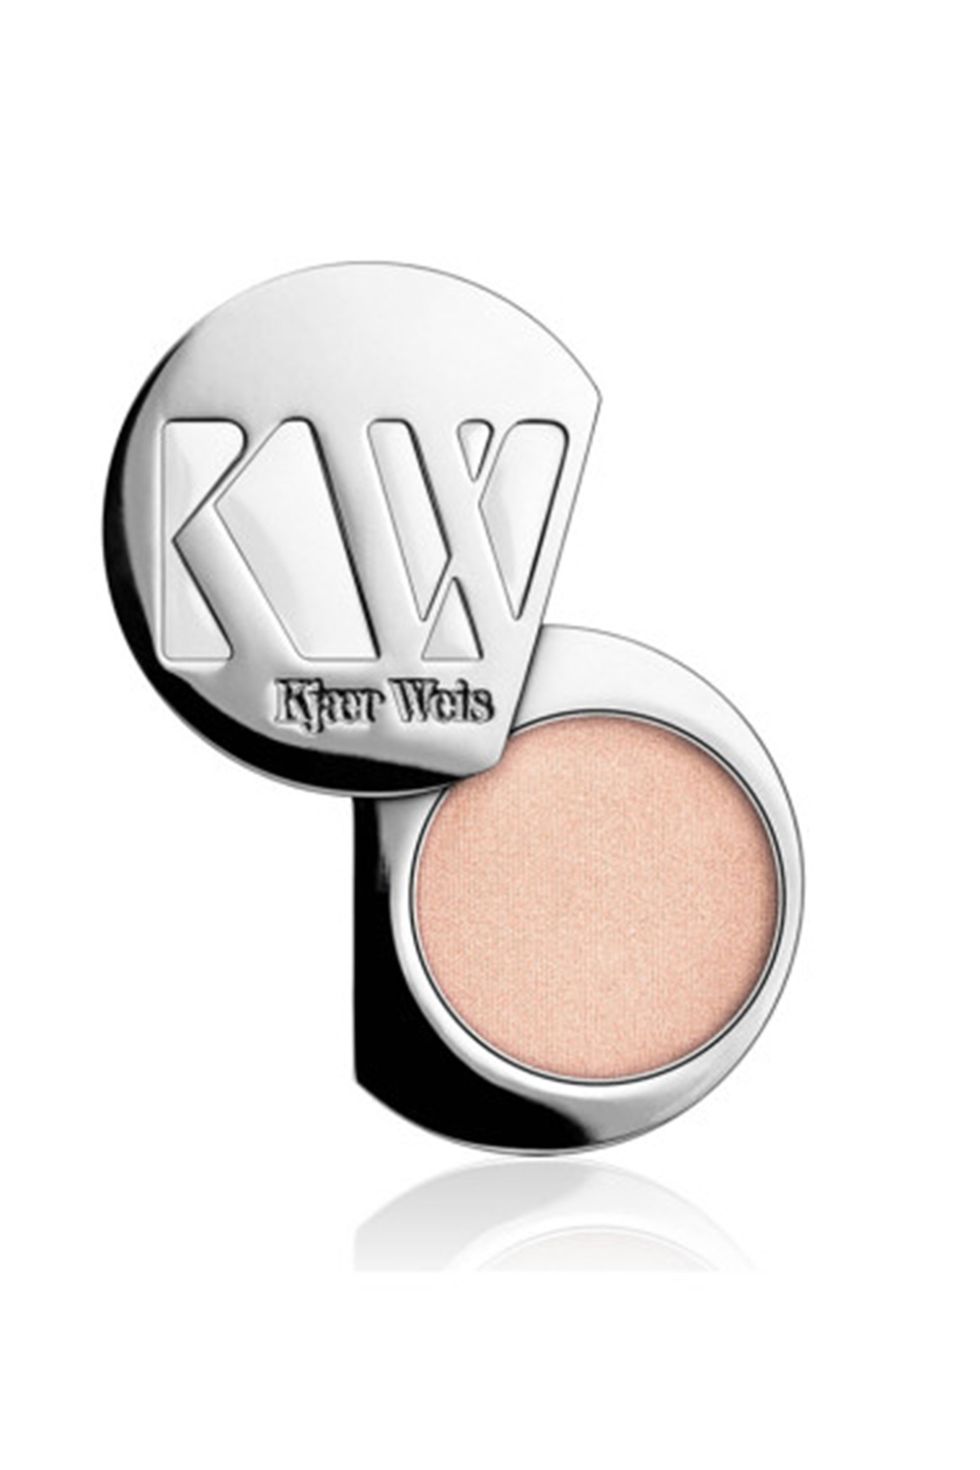 Peach, Tan, Face powder, Circle, Graphics, Cosmetics, Paint, Chemical compound, Silver, Drawing, 